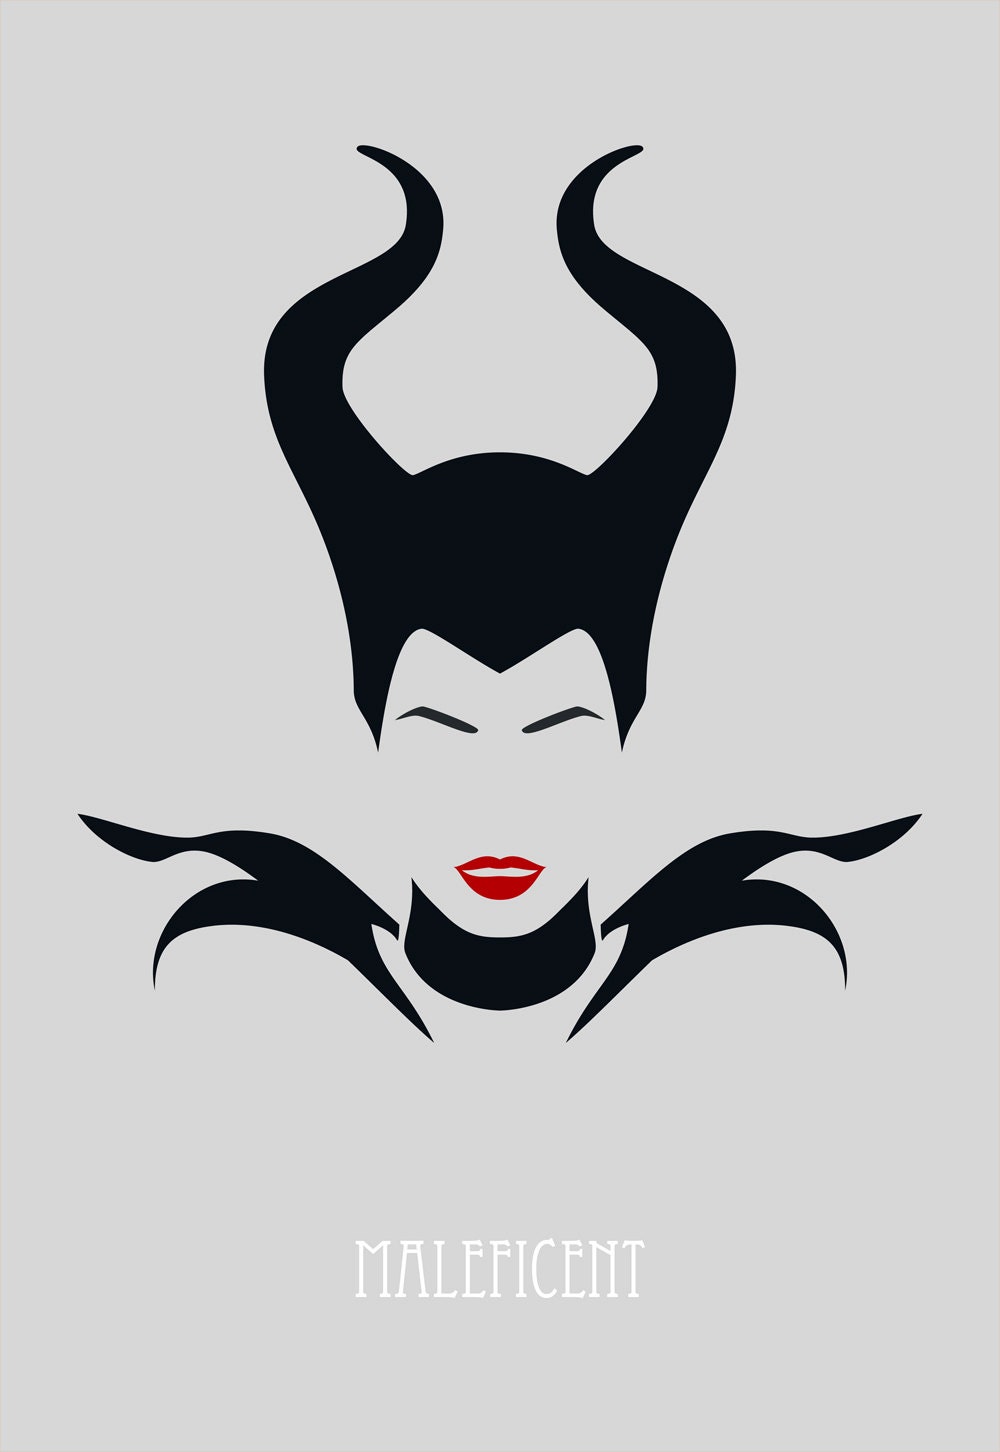 maleficent movie poster postcard 4'X6' by LiveitupS2 on Etsy